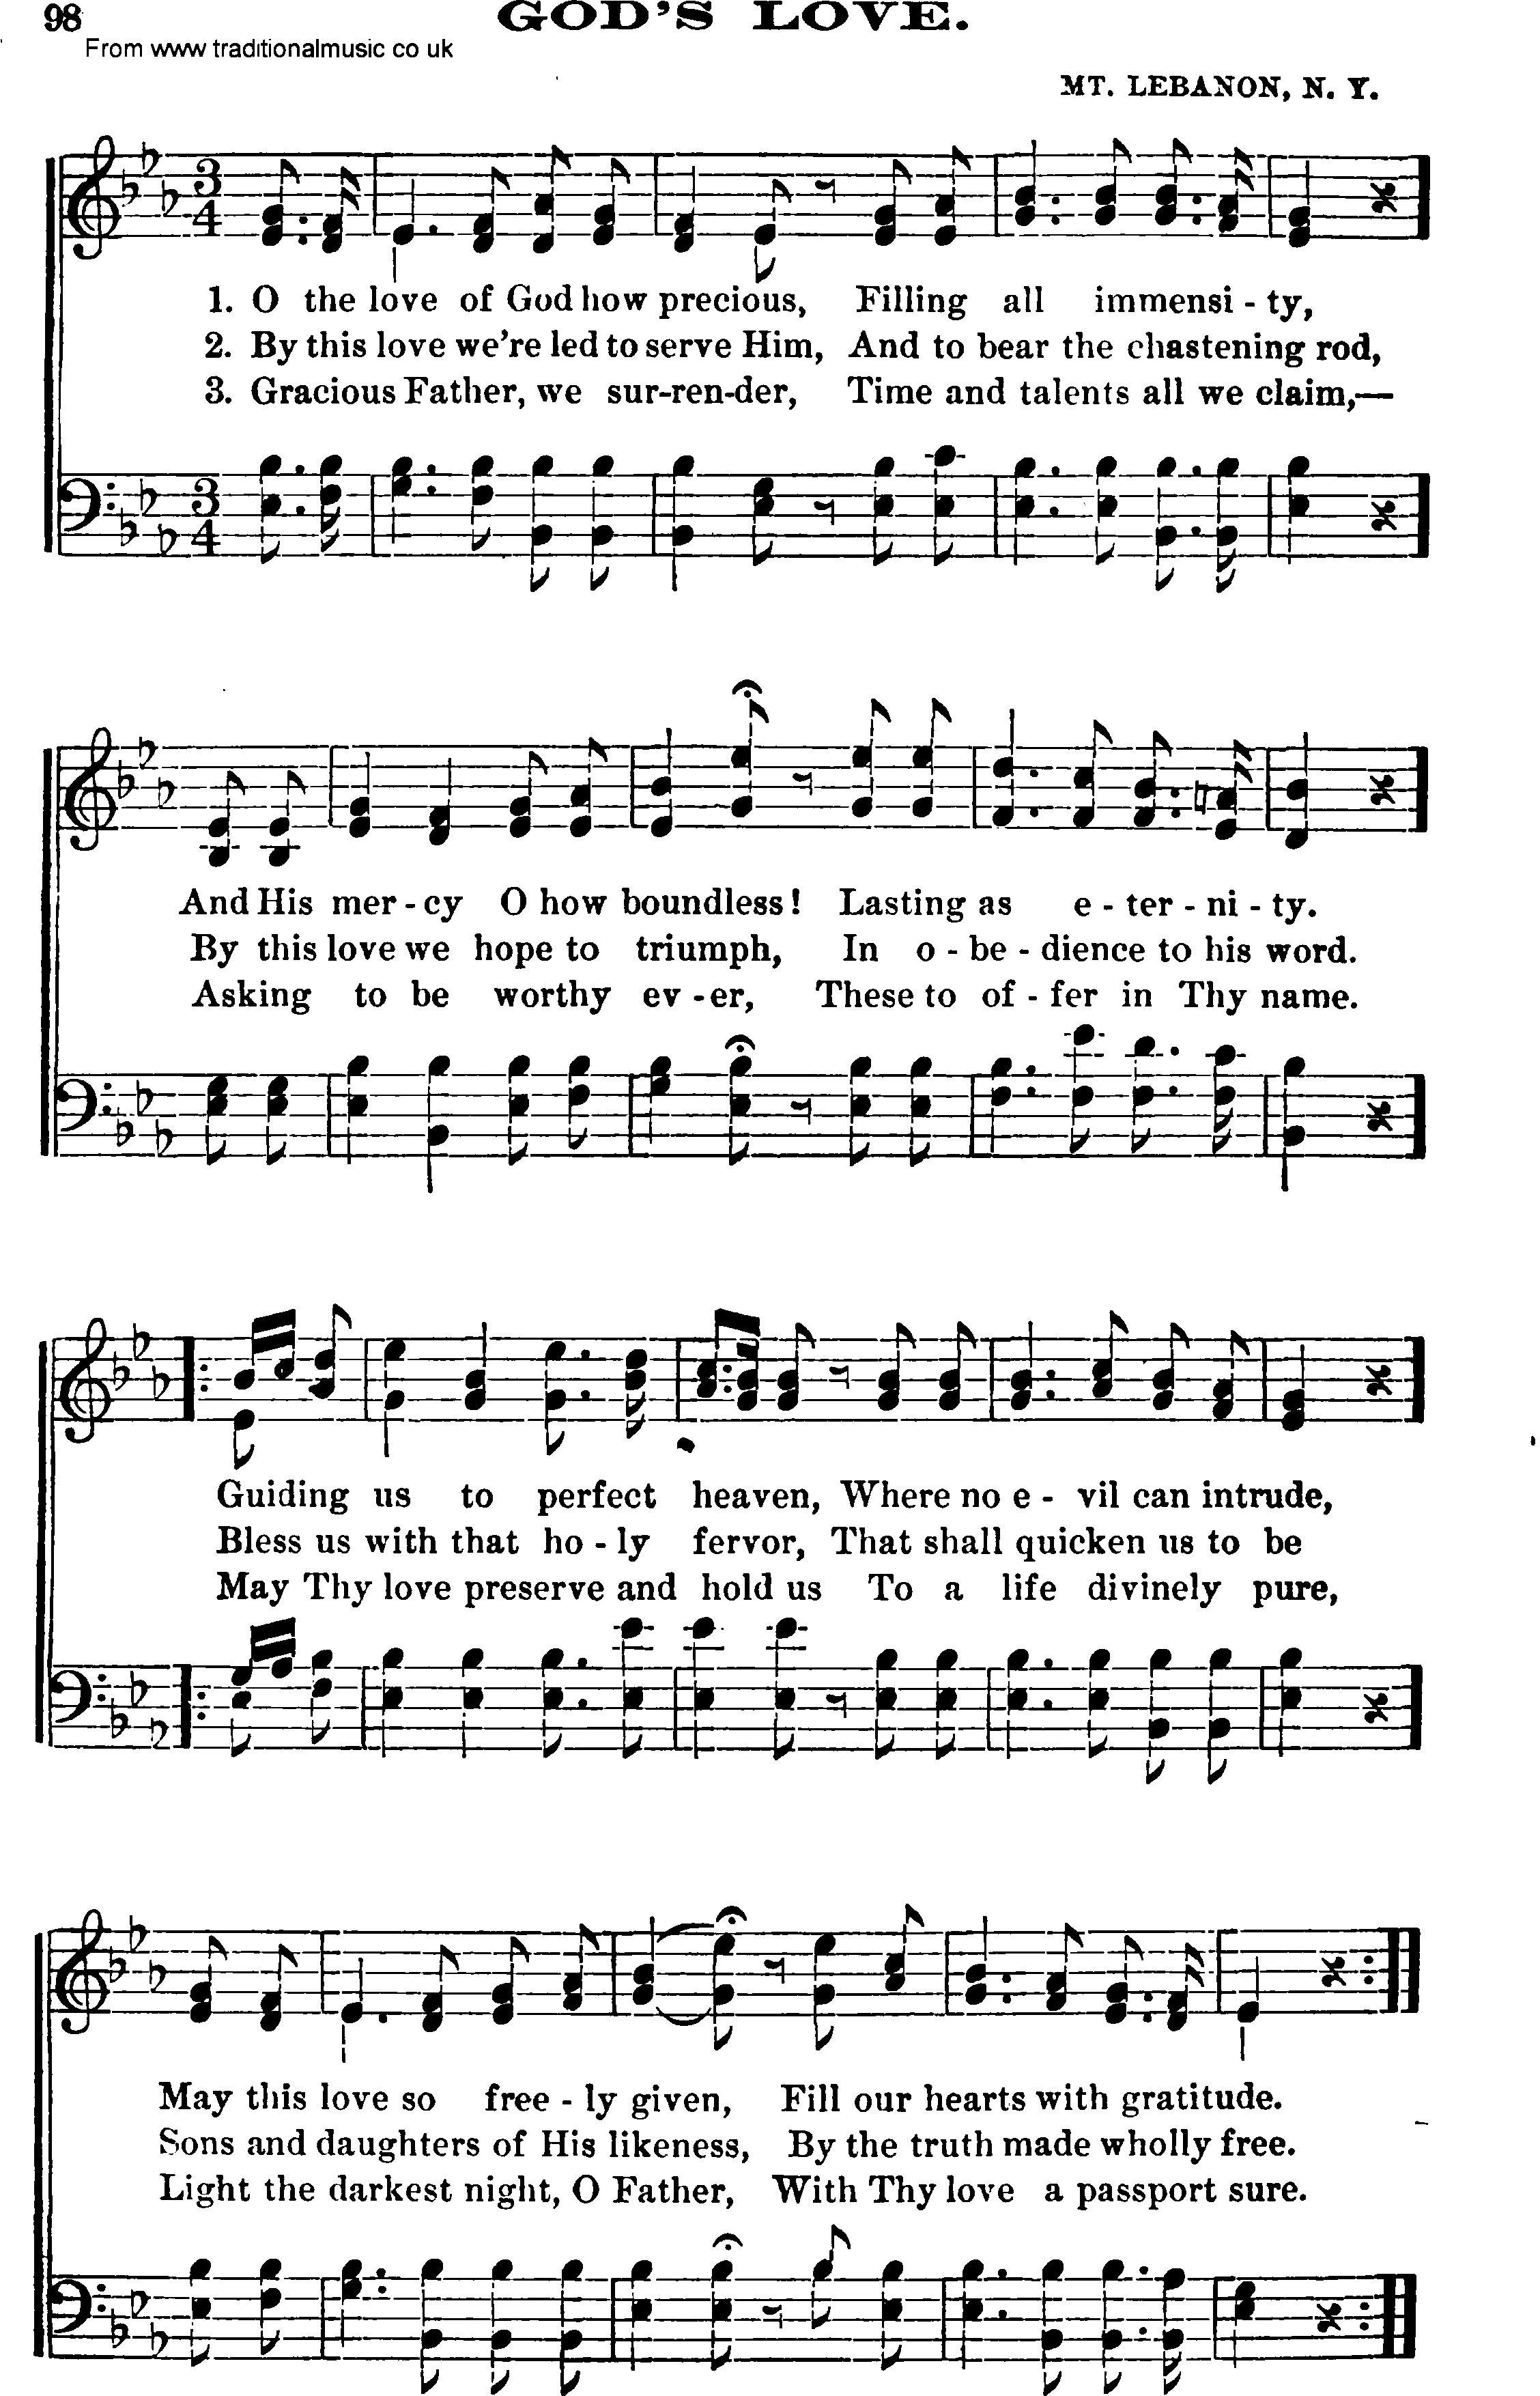 Shaker Music collection, Hymn: God's Love, sheetmusic and PDF